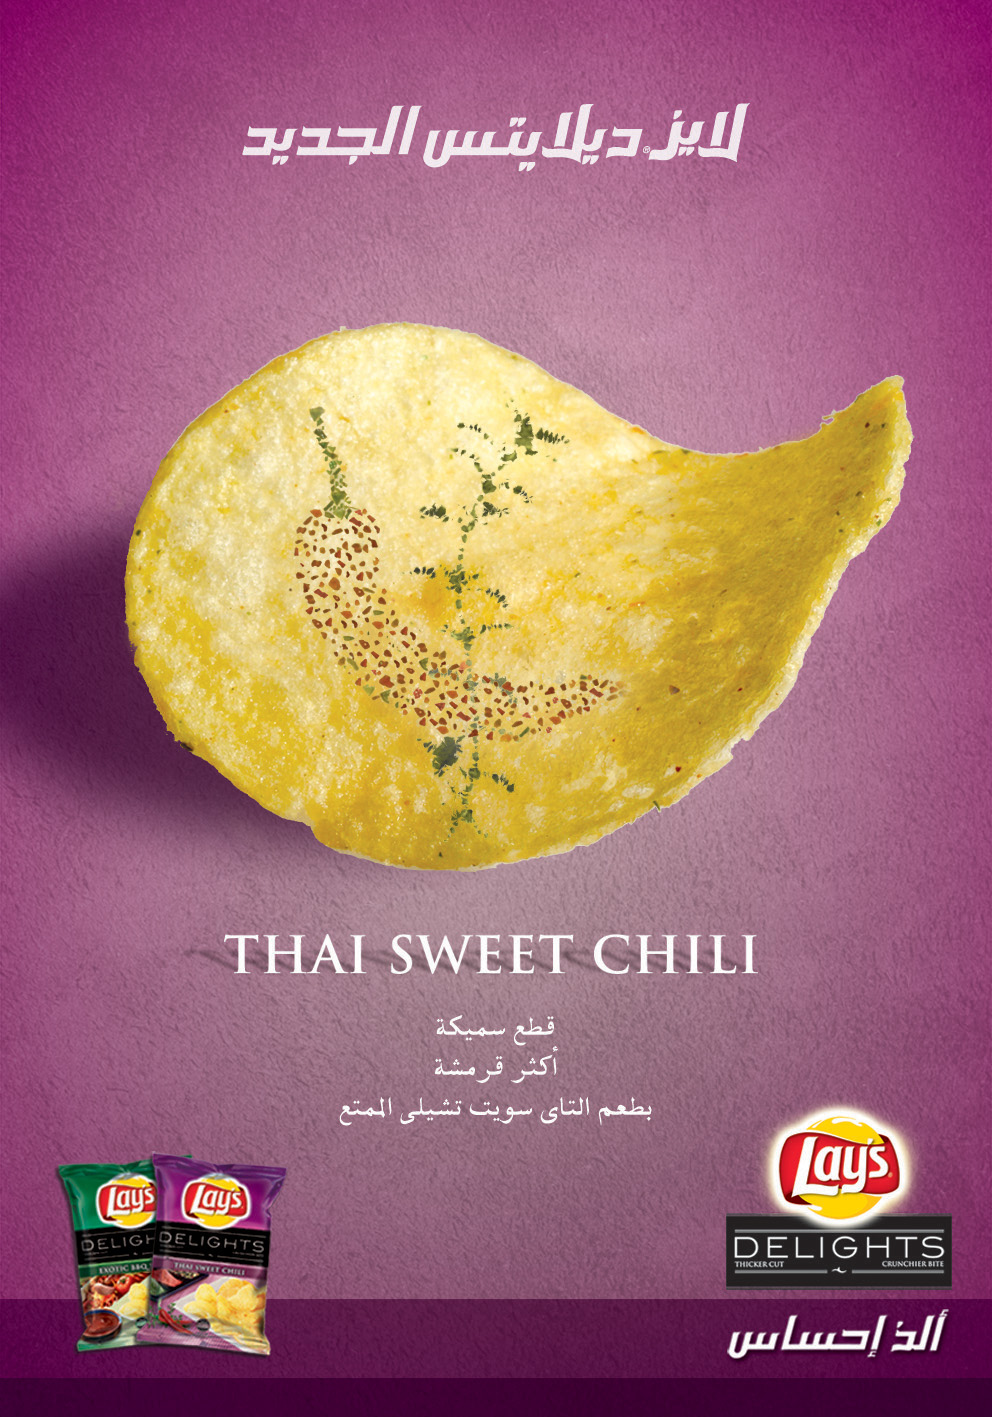 Lays lays delights potato chips press ad